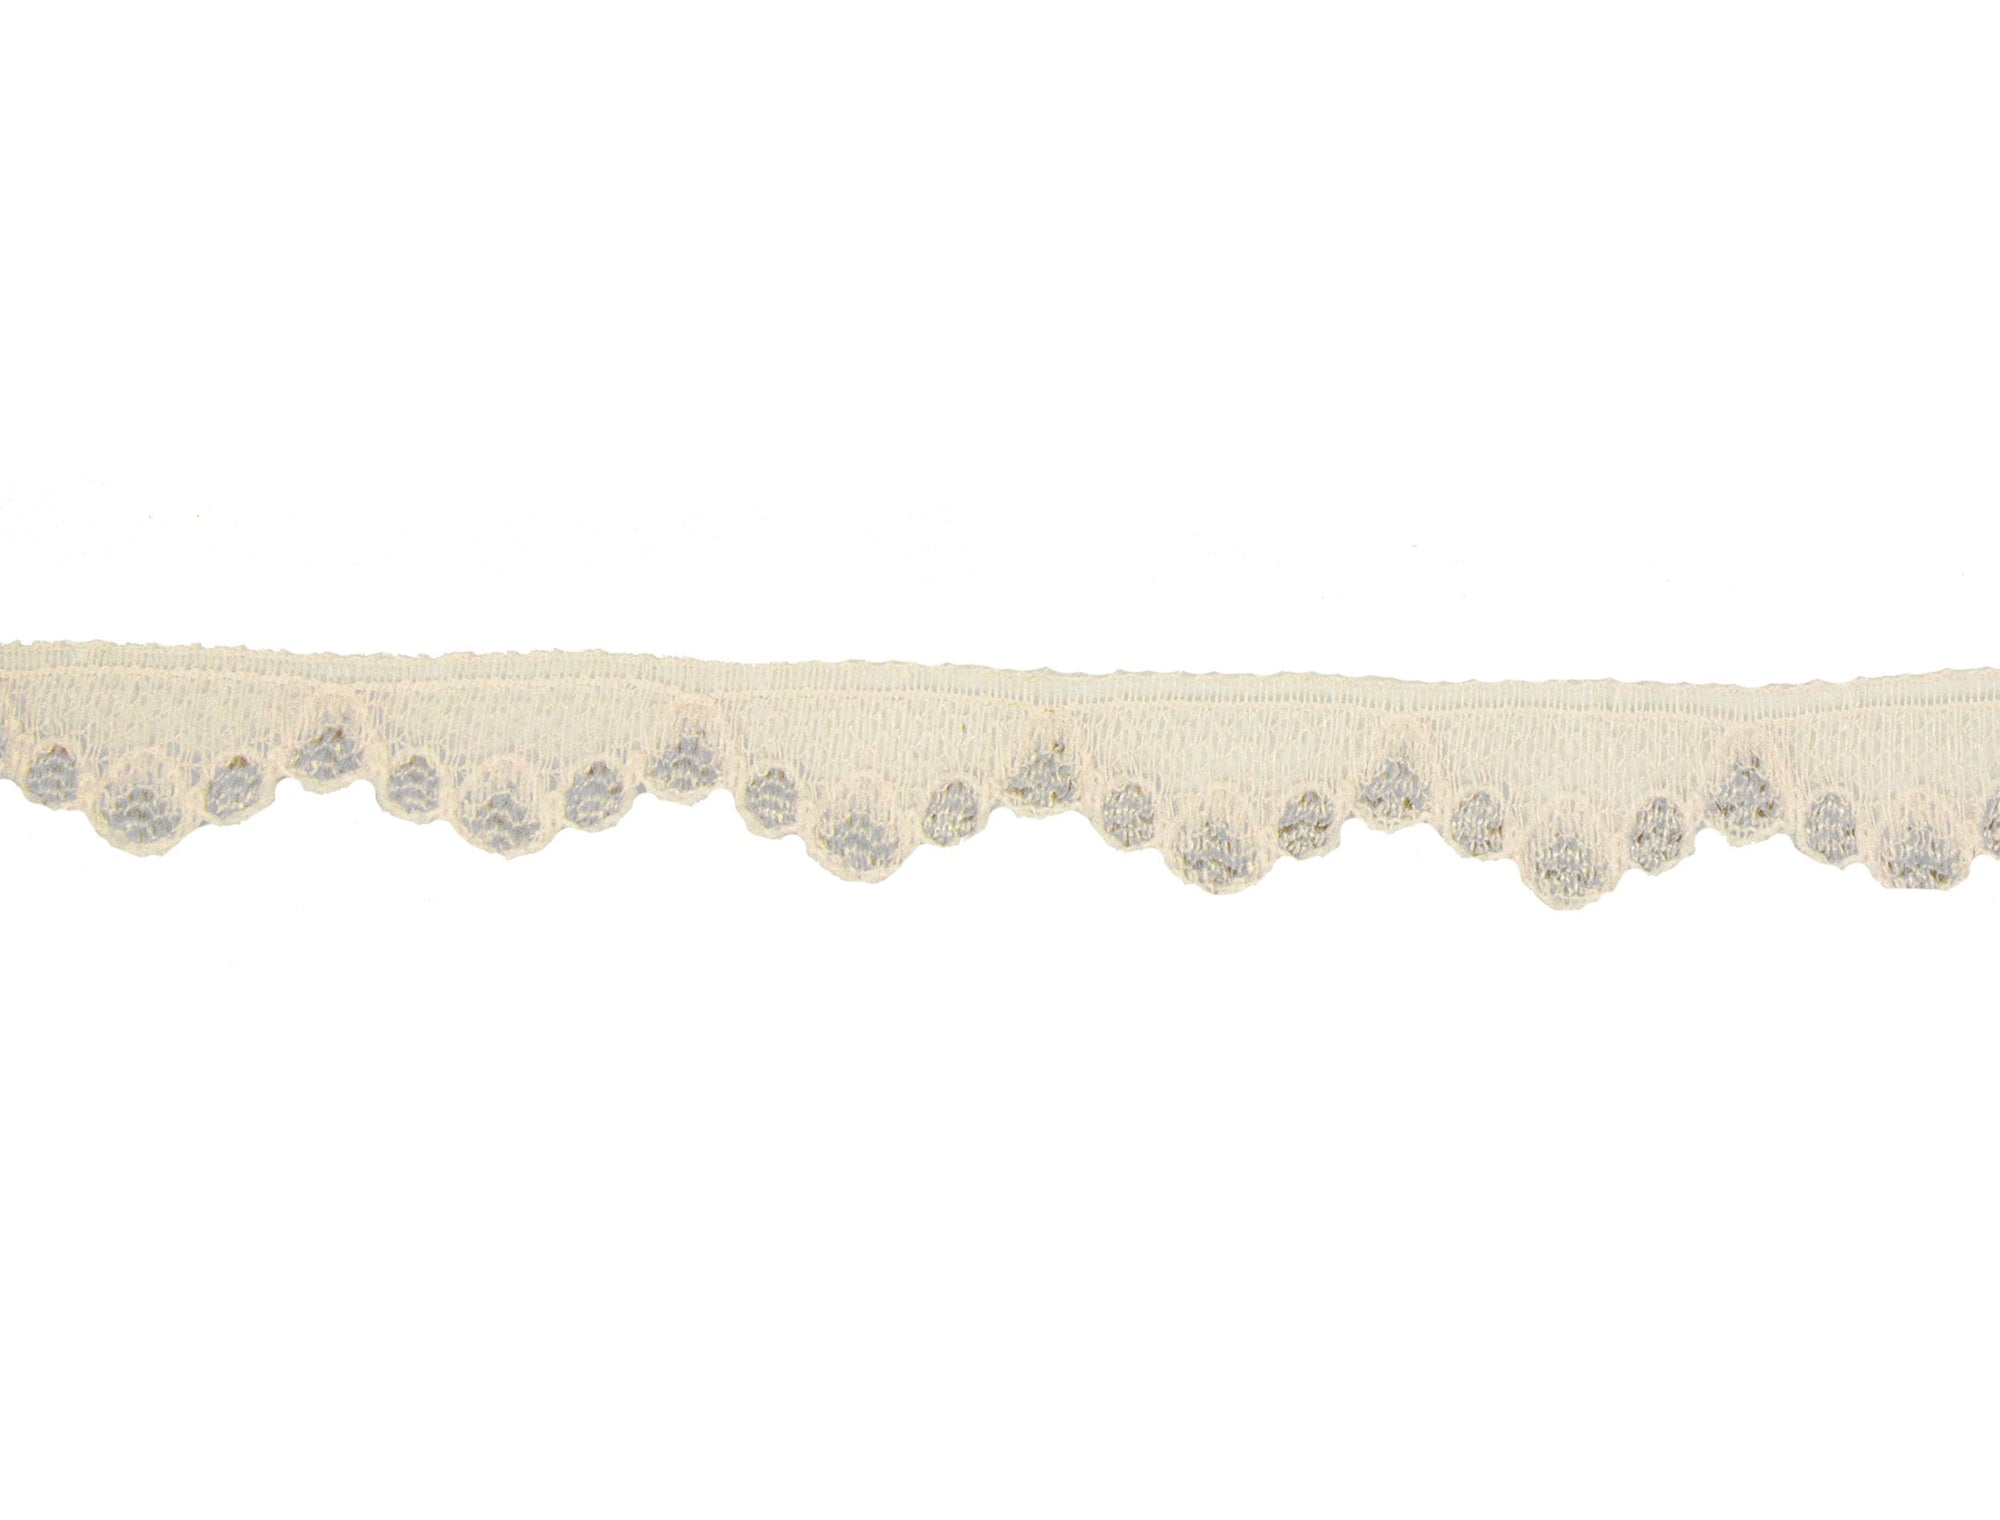 Vintage Lace Pale Pink Dot Pattern with Scalloped Edge Measures  1/2" Wide - One Piece 6 3/4" Yards Length